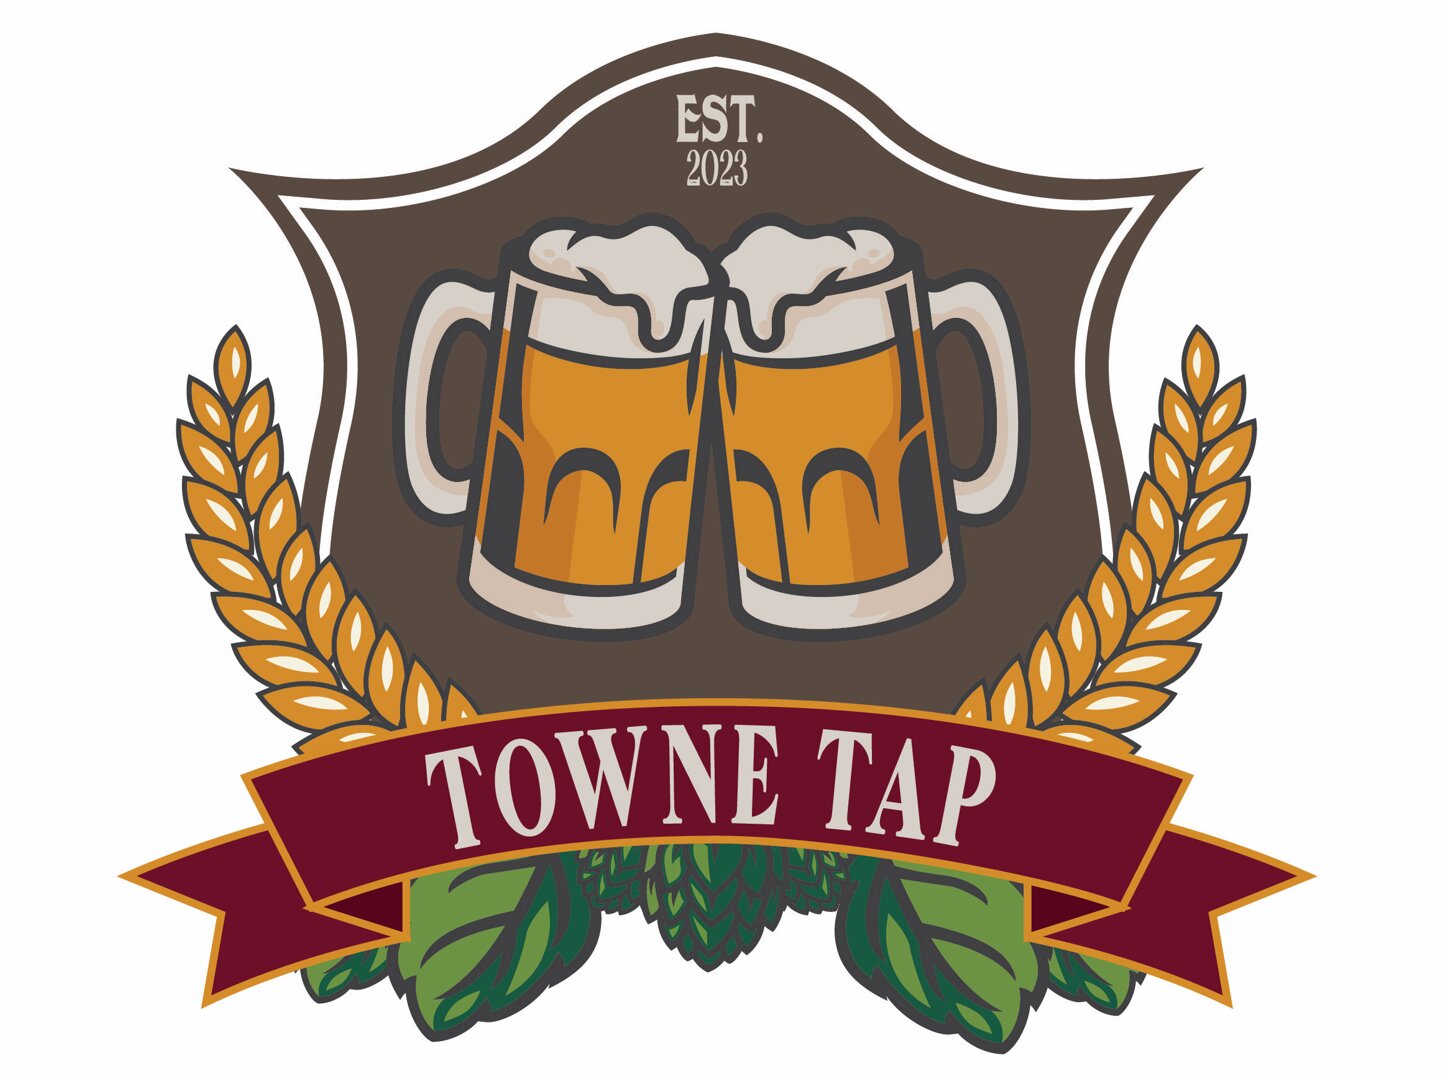 Every town needs a pub and Towne Tap is filling that void.